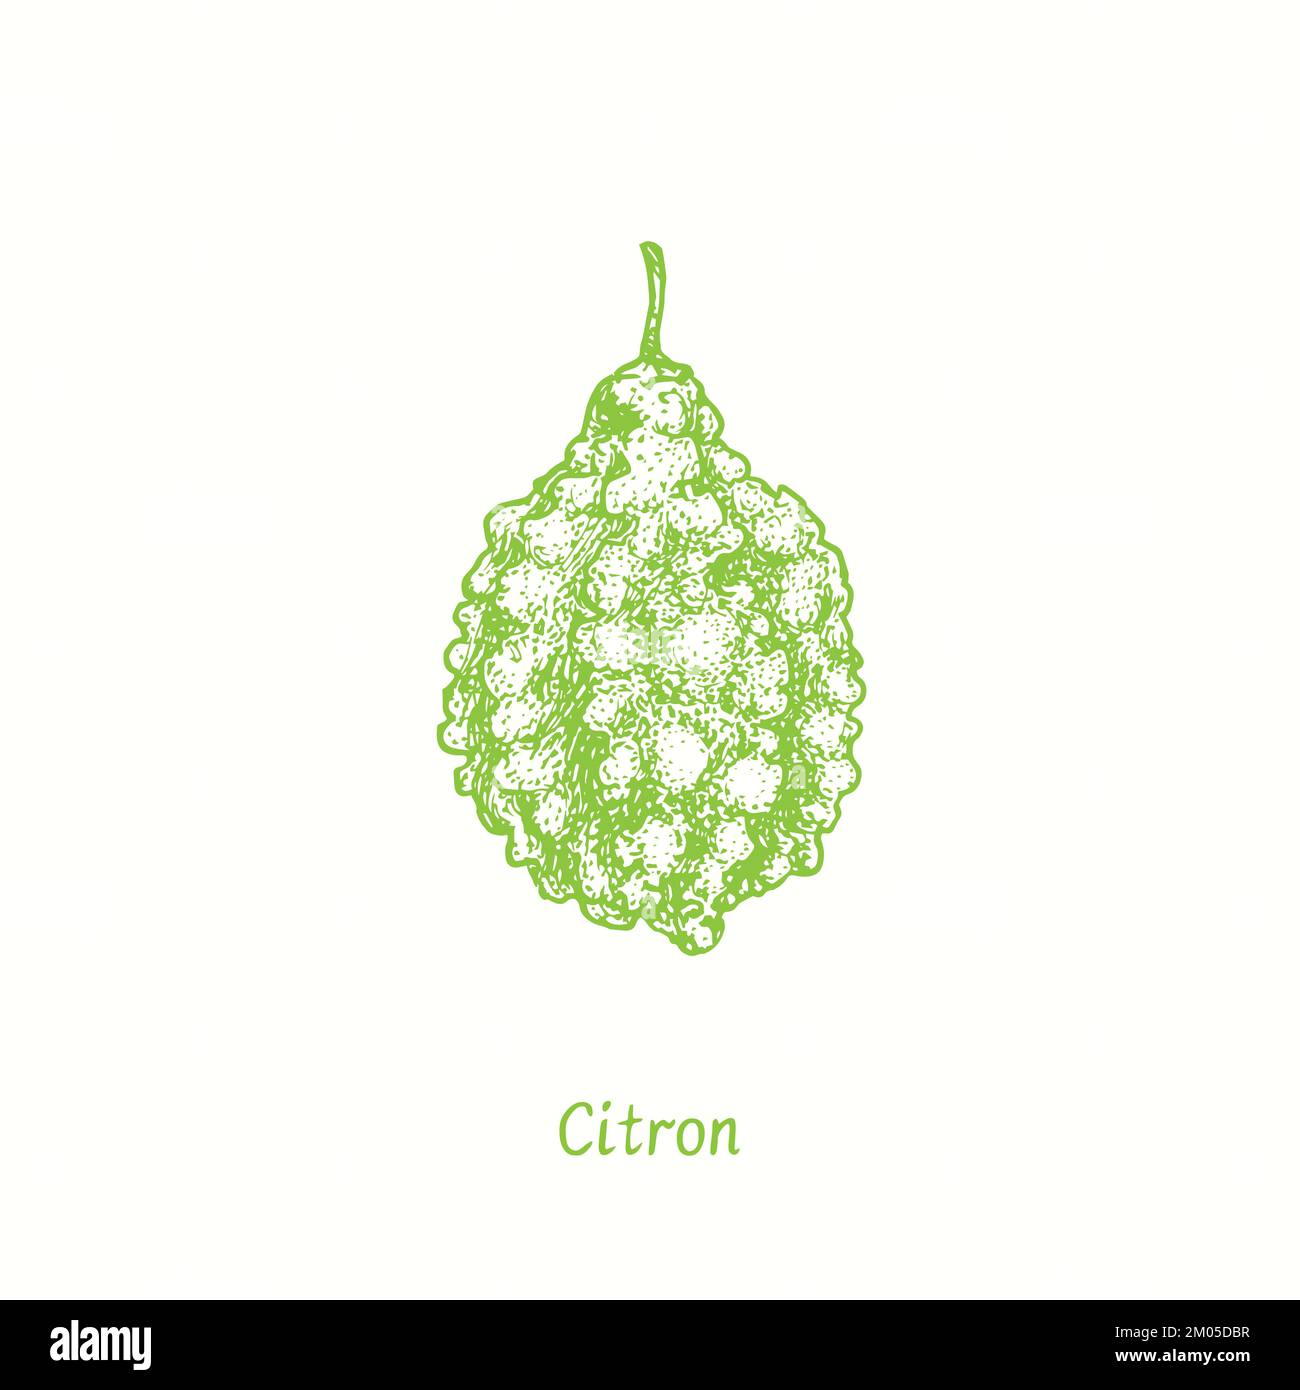 Citron fruit. Ink doodle drawing in woodcut style Stock Photo